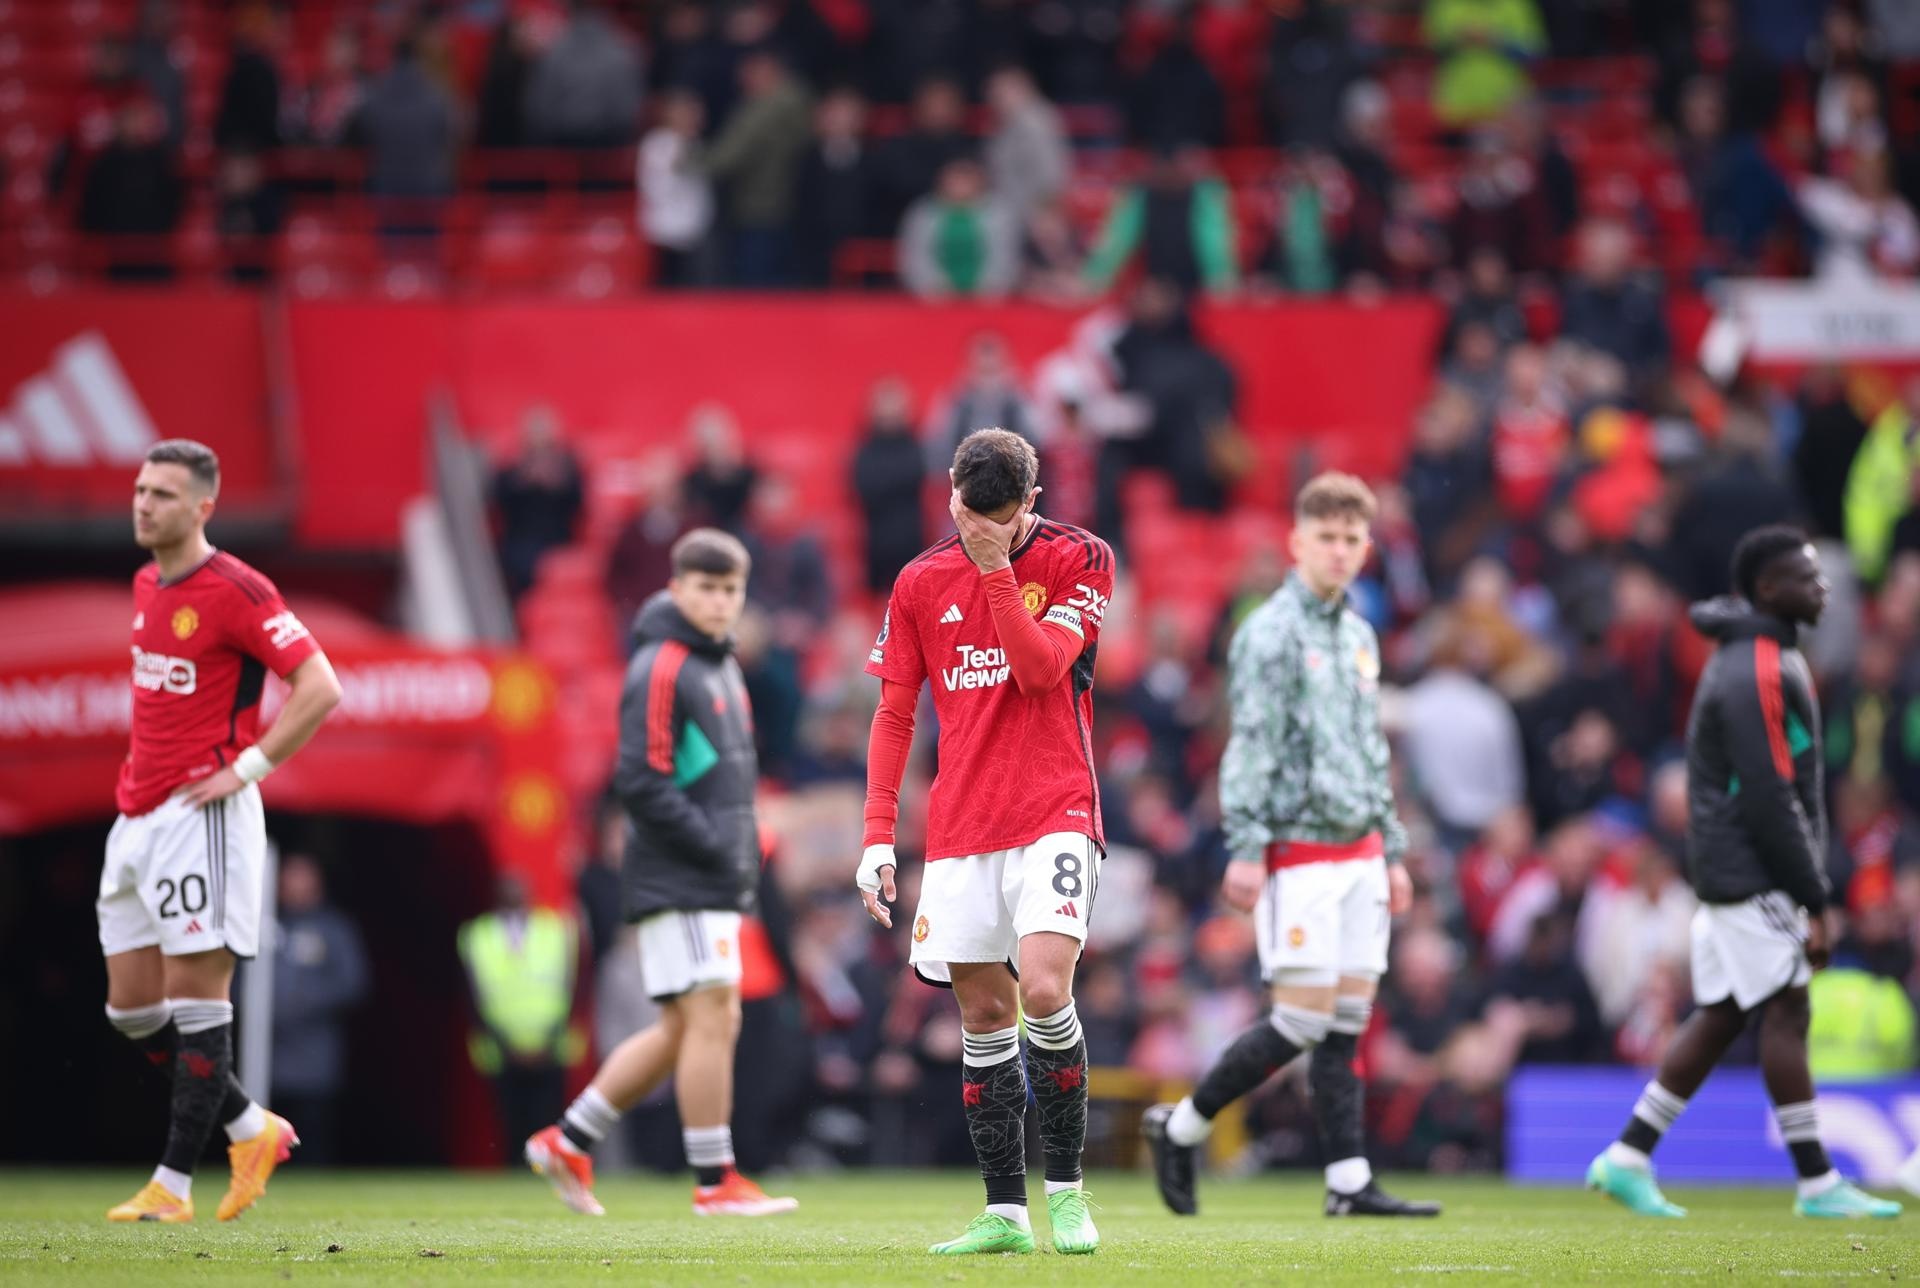 Man Utd on brink of worst Premier League campaign of their history